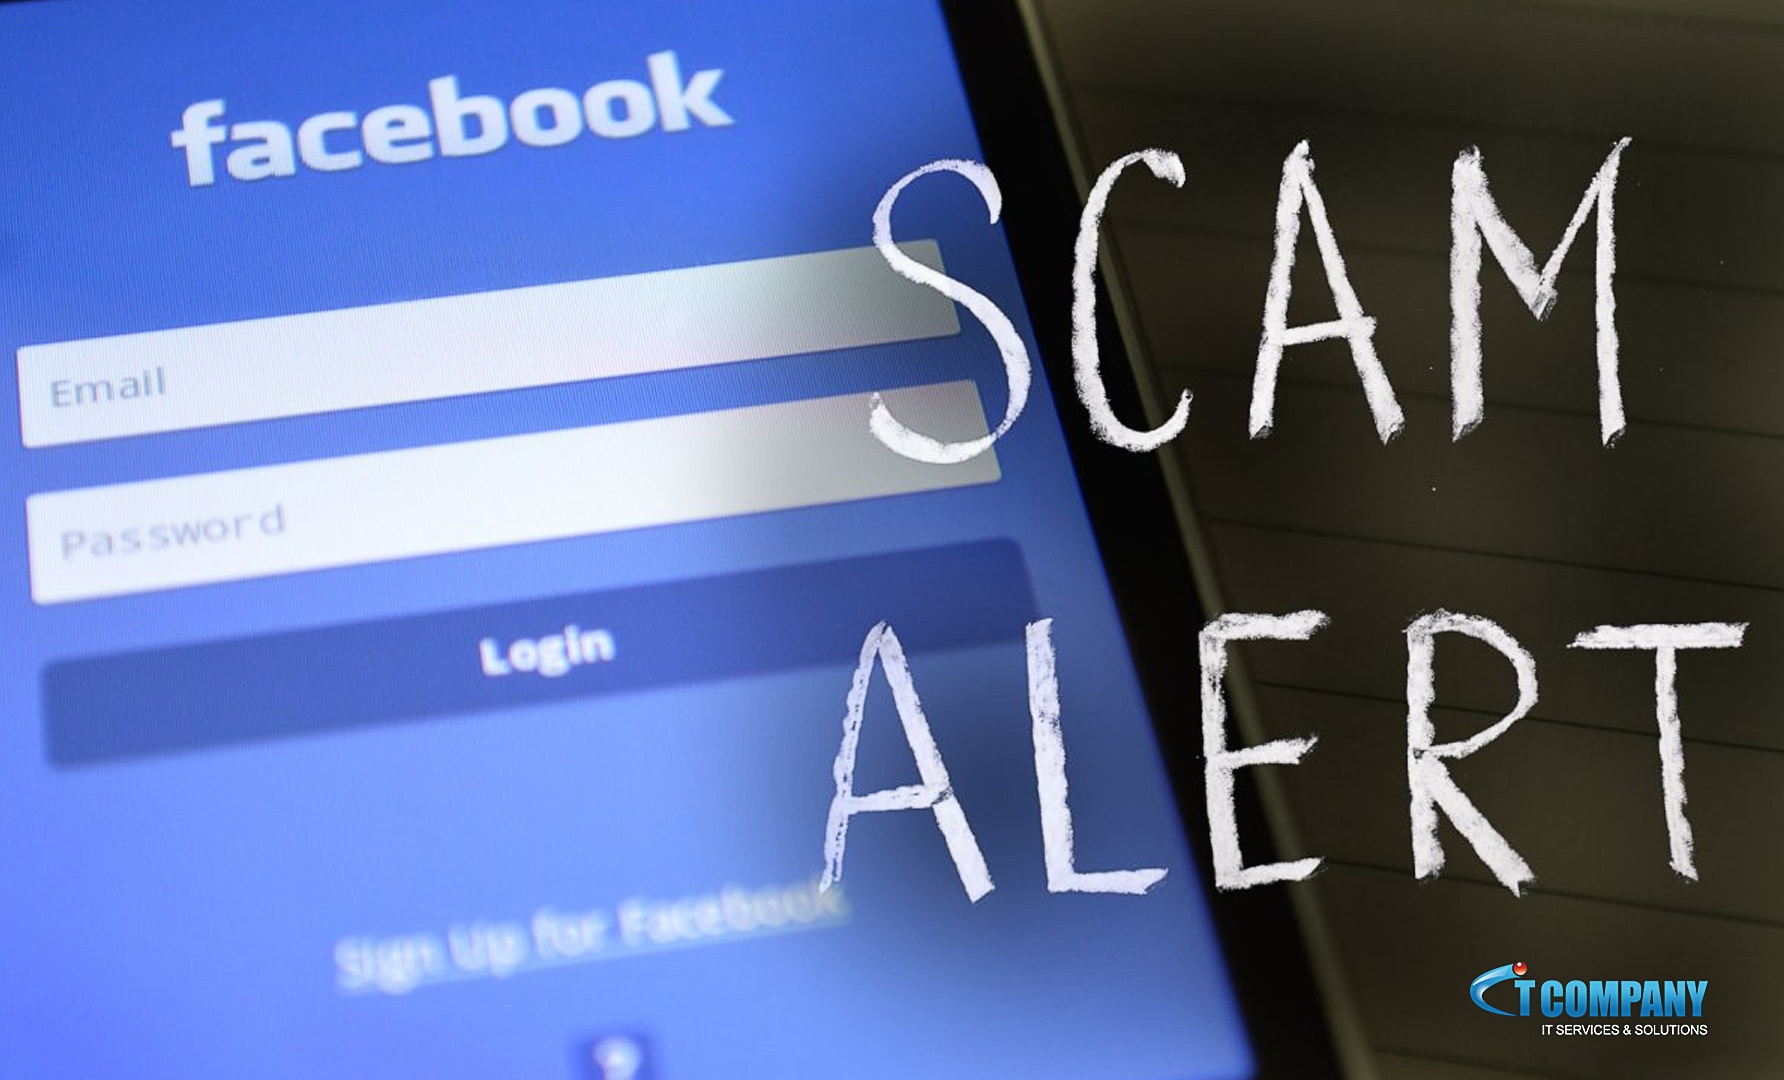 Facebook Messenger Phishing Scam: Things you need to know!